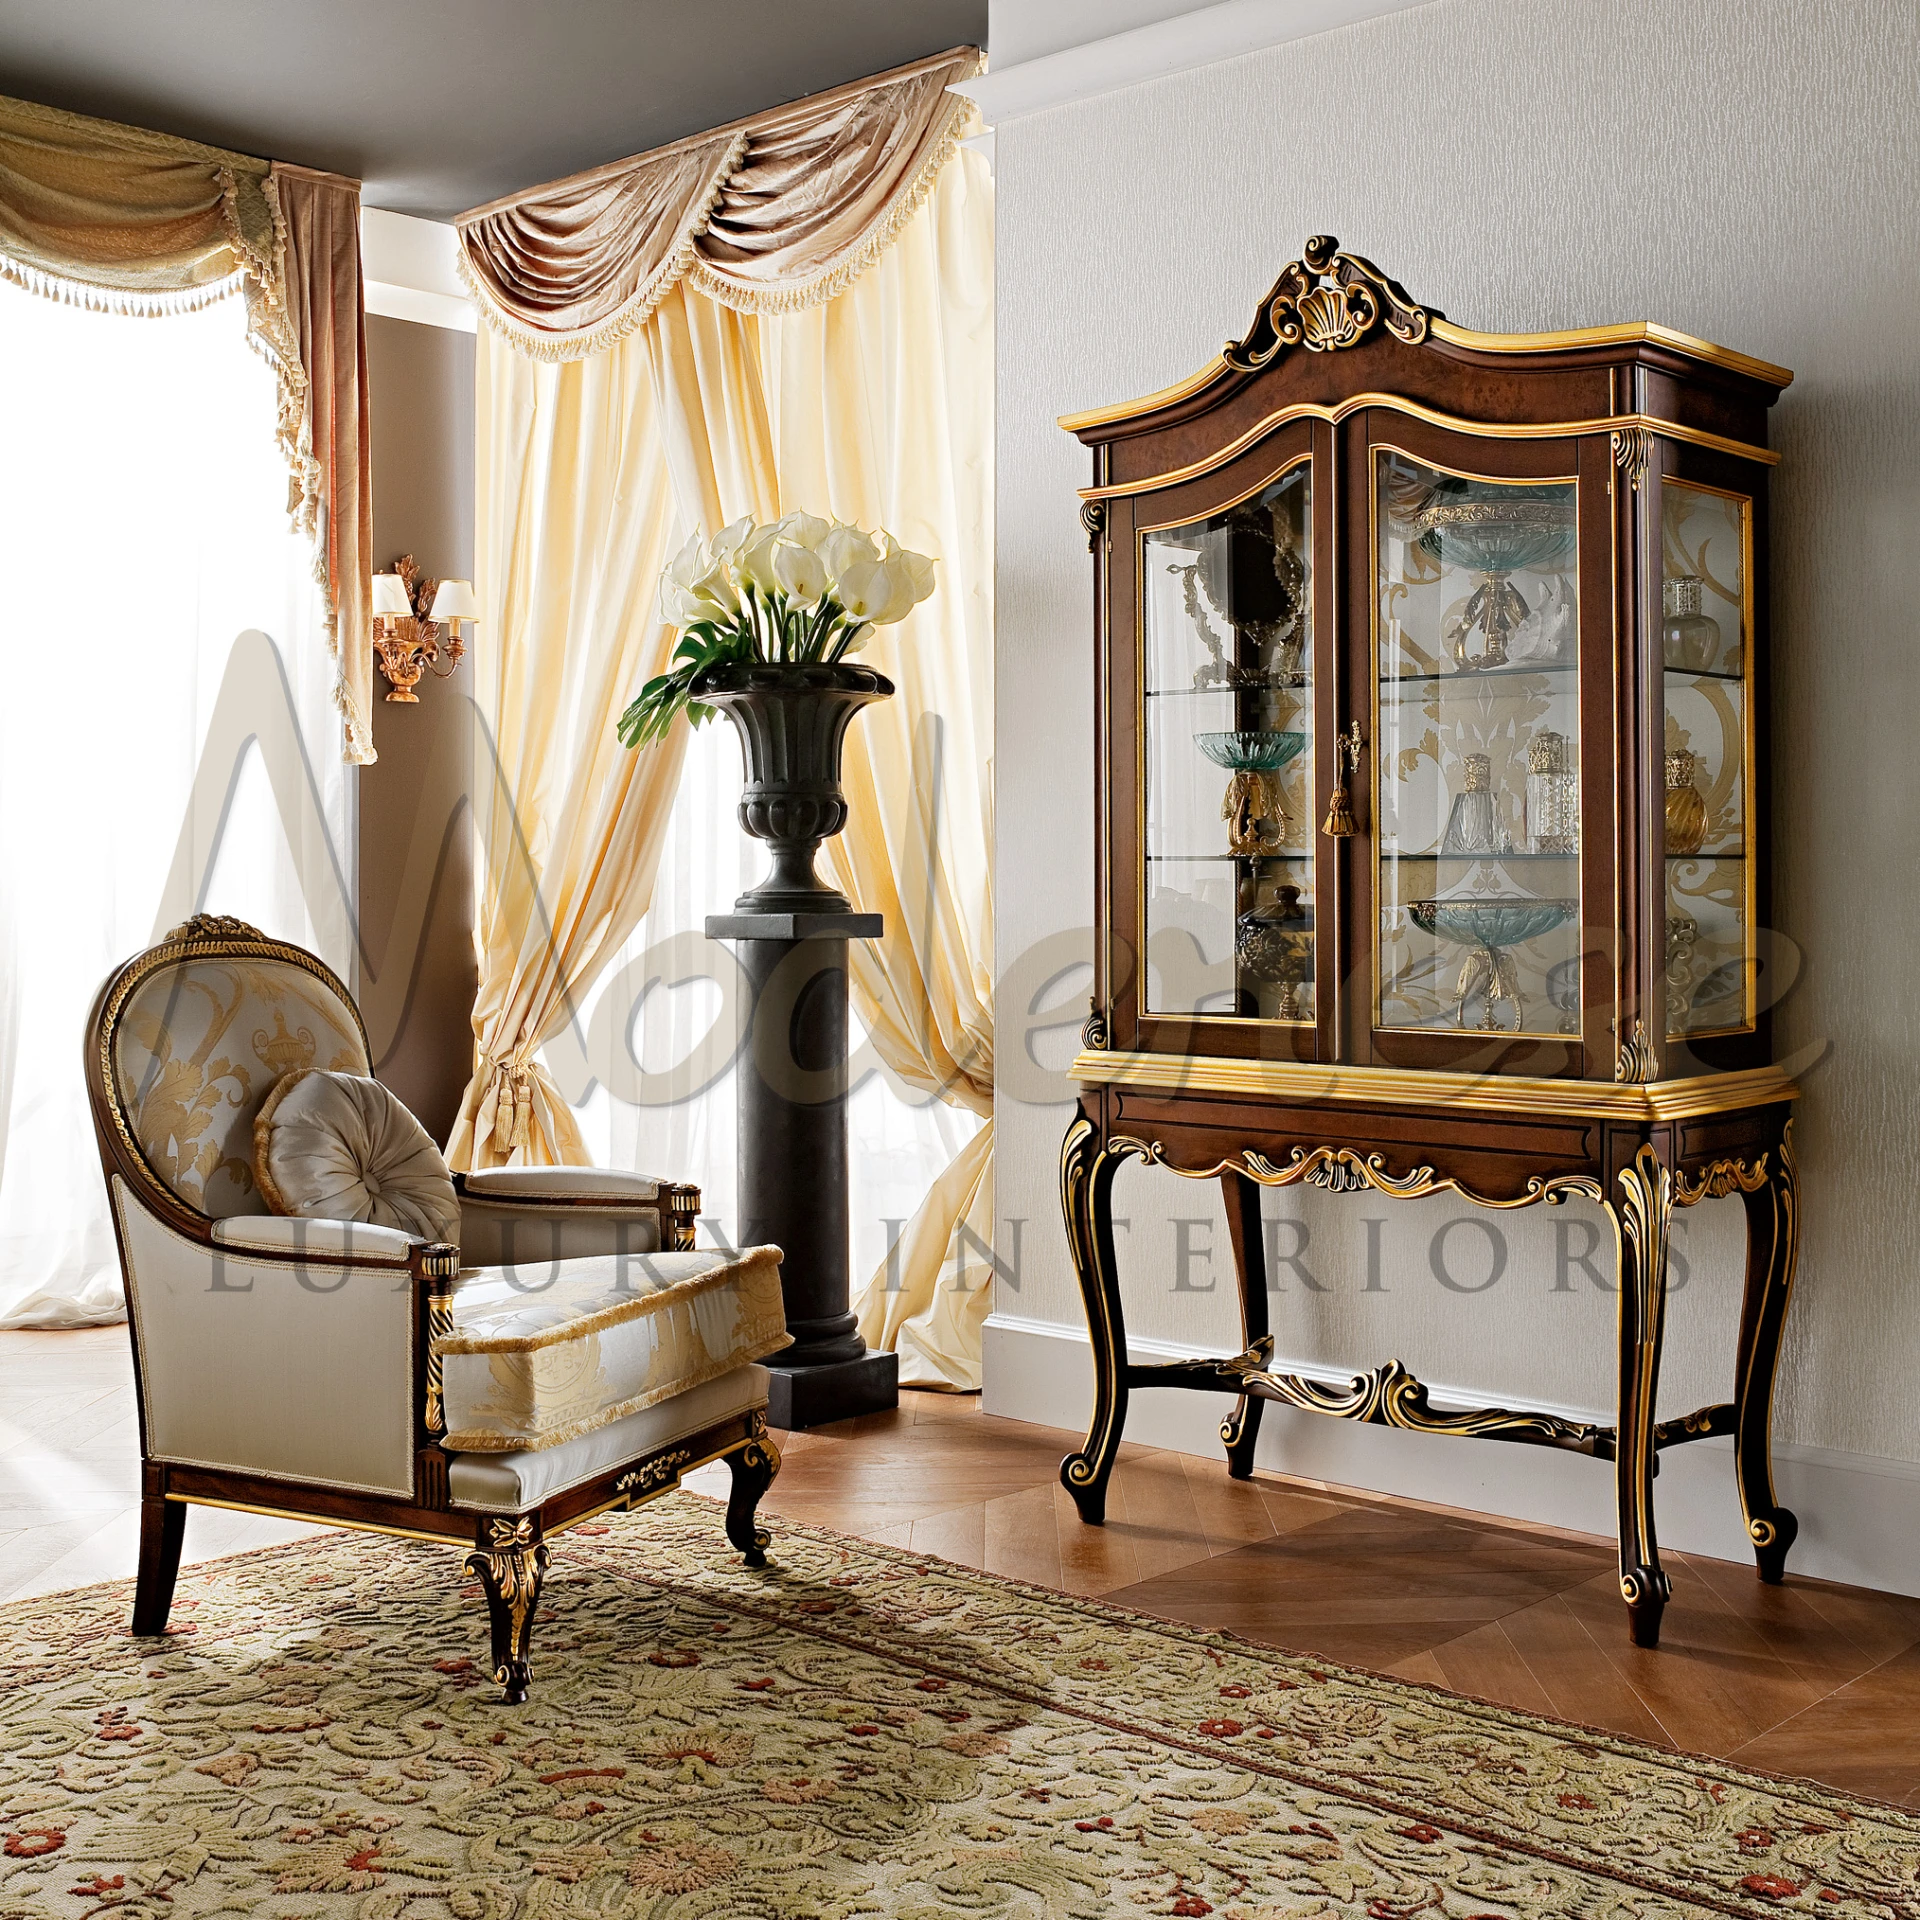 A classical room with traditional furniture, including a chair and an Imperial showcase secretaire with glass doors.